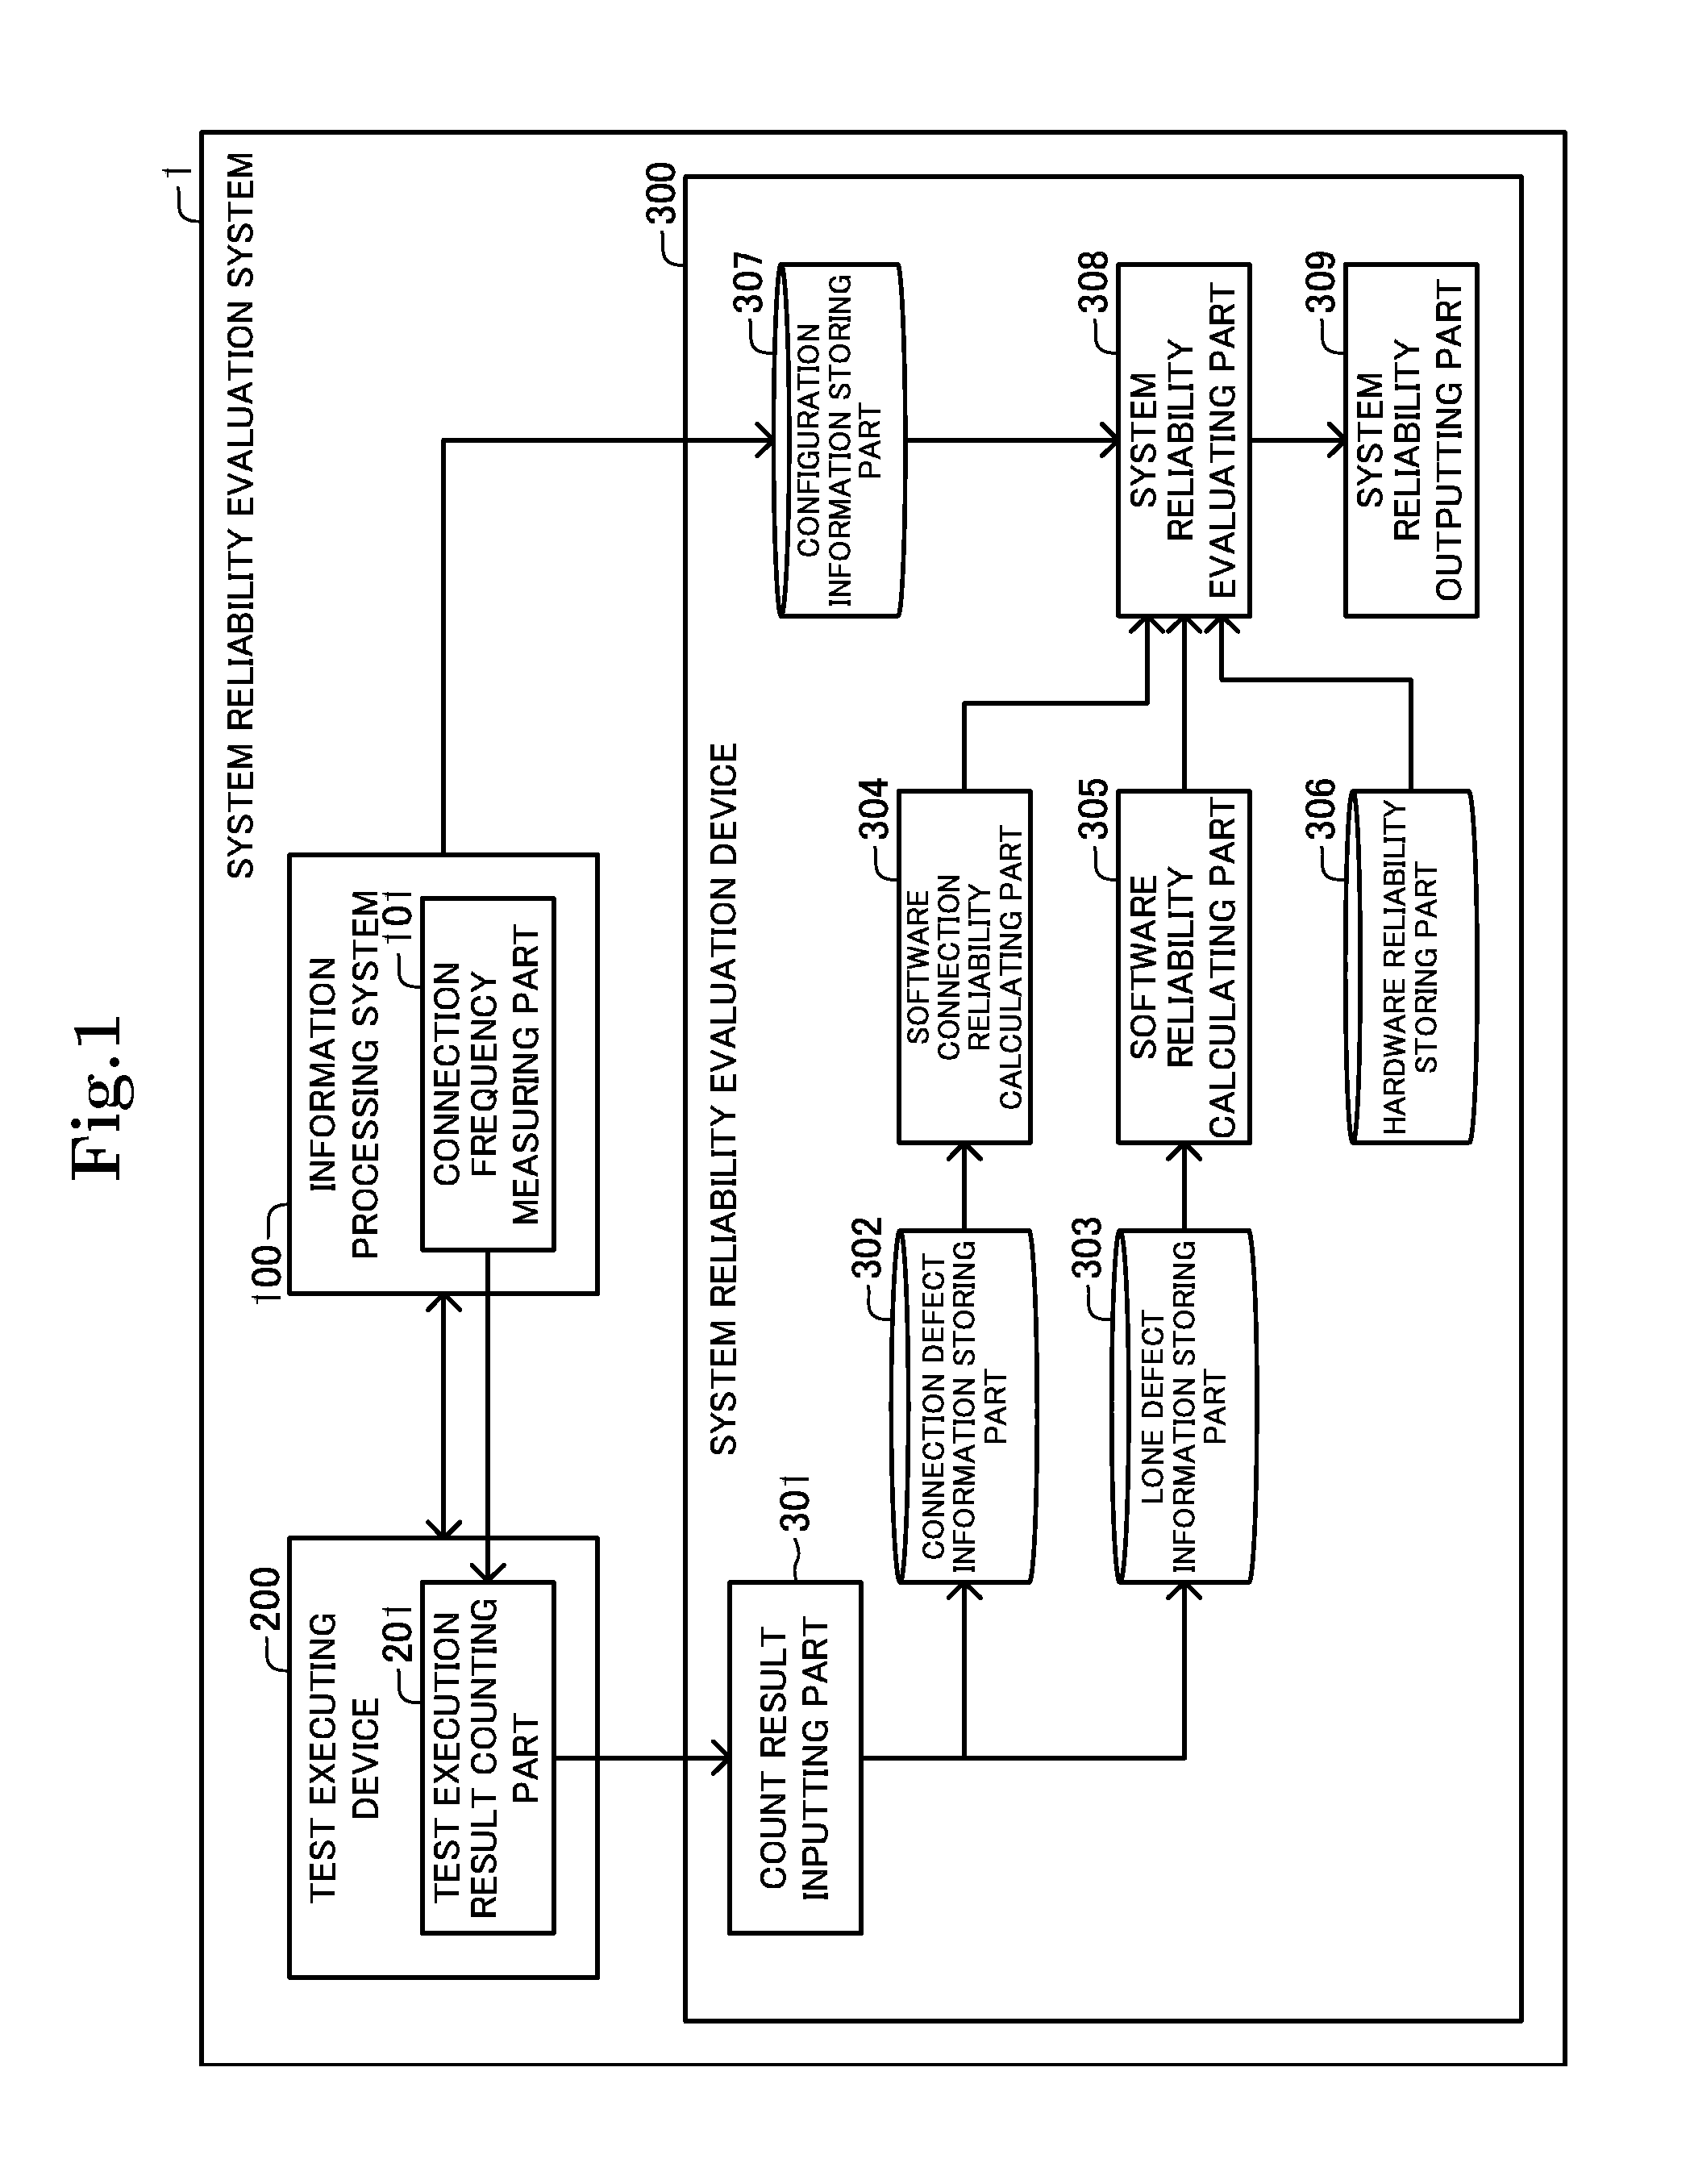 System reliability evaluation device